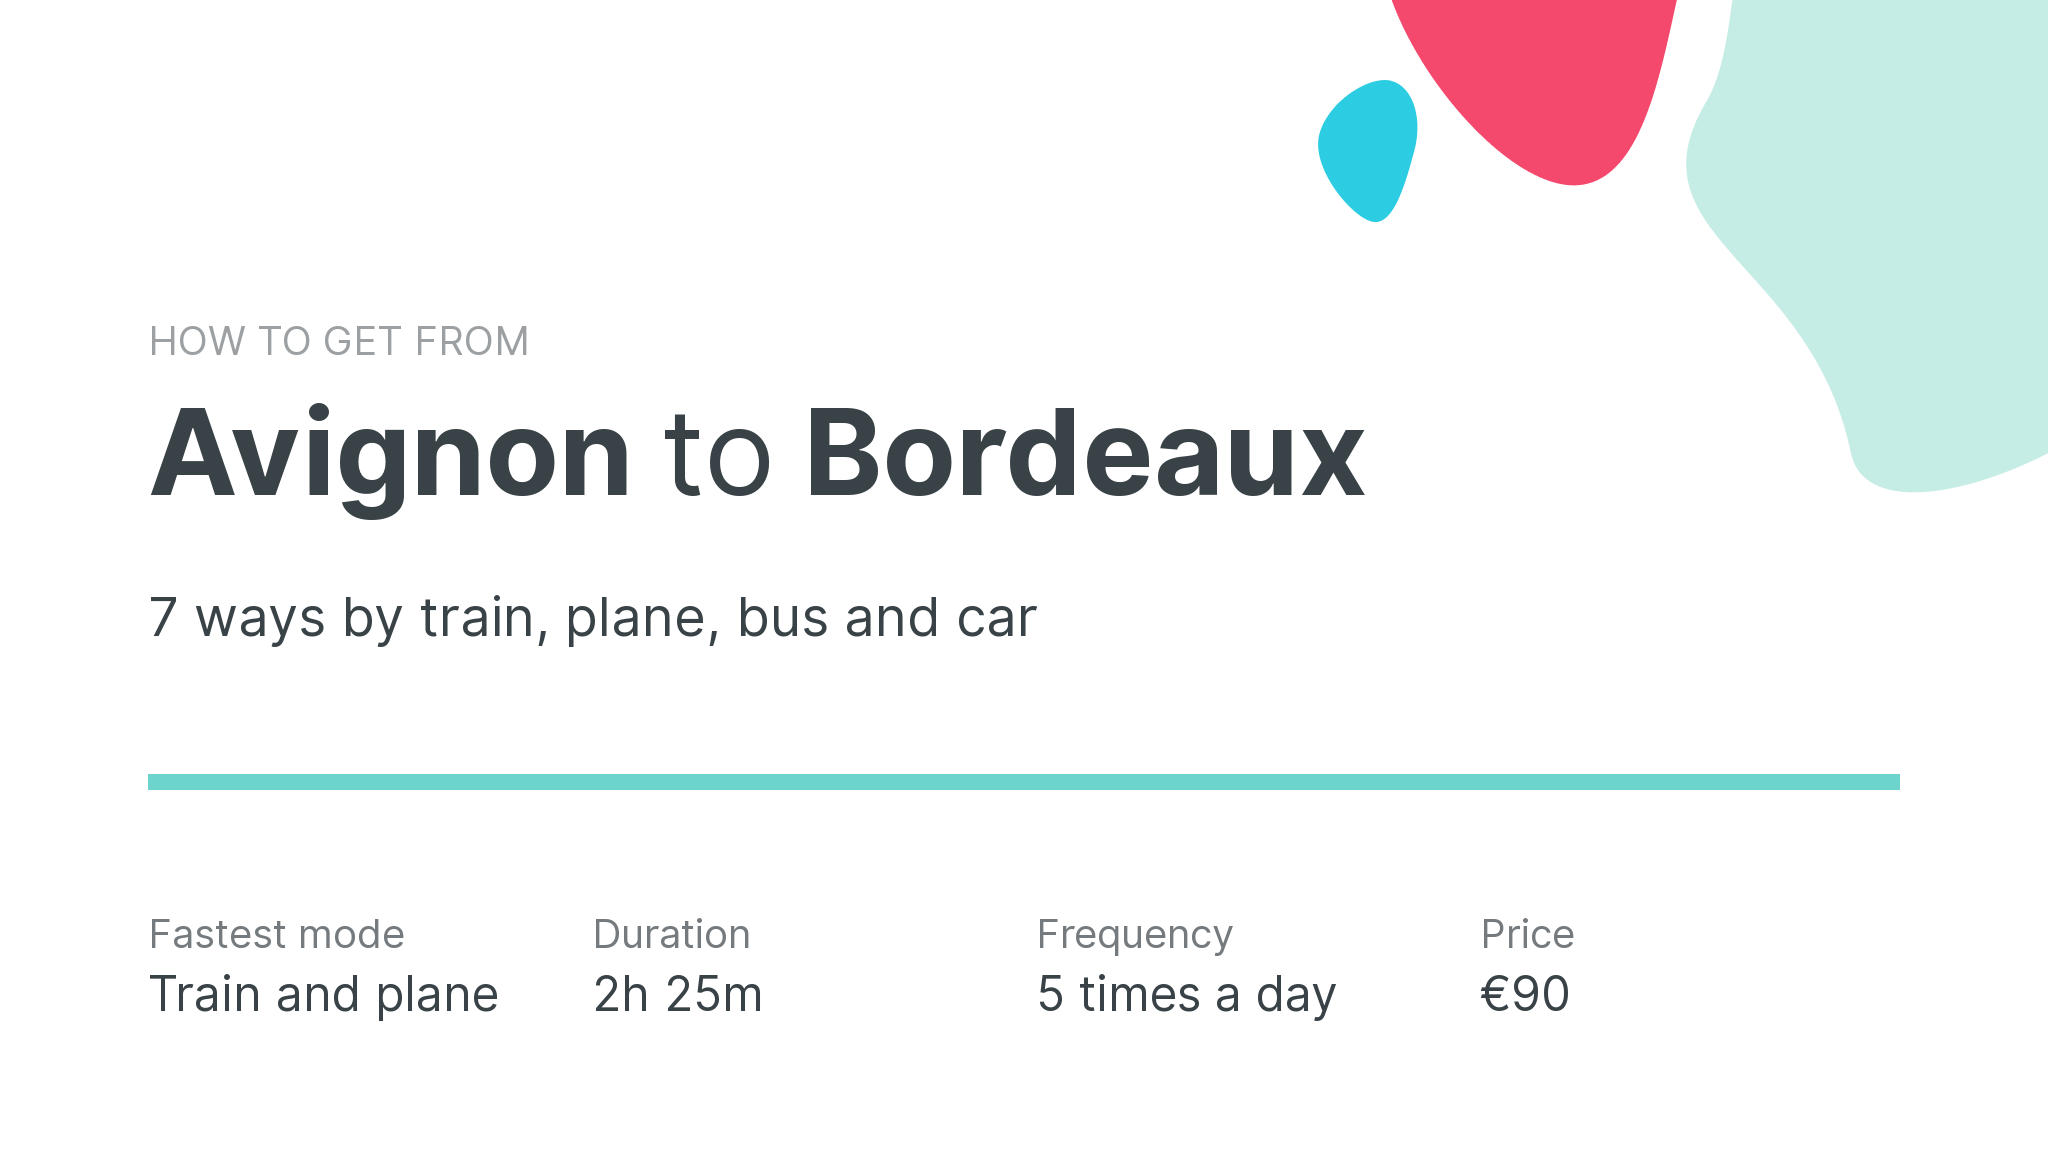 How do I get from Avignon to Bordeaux